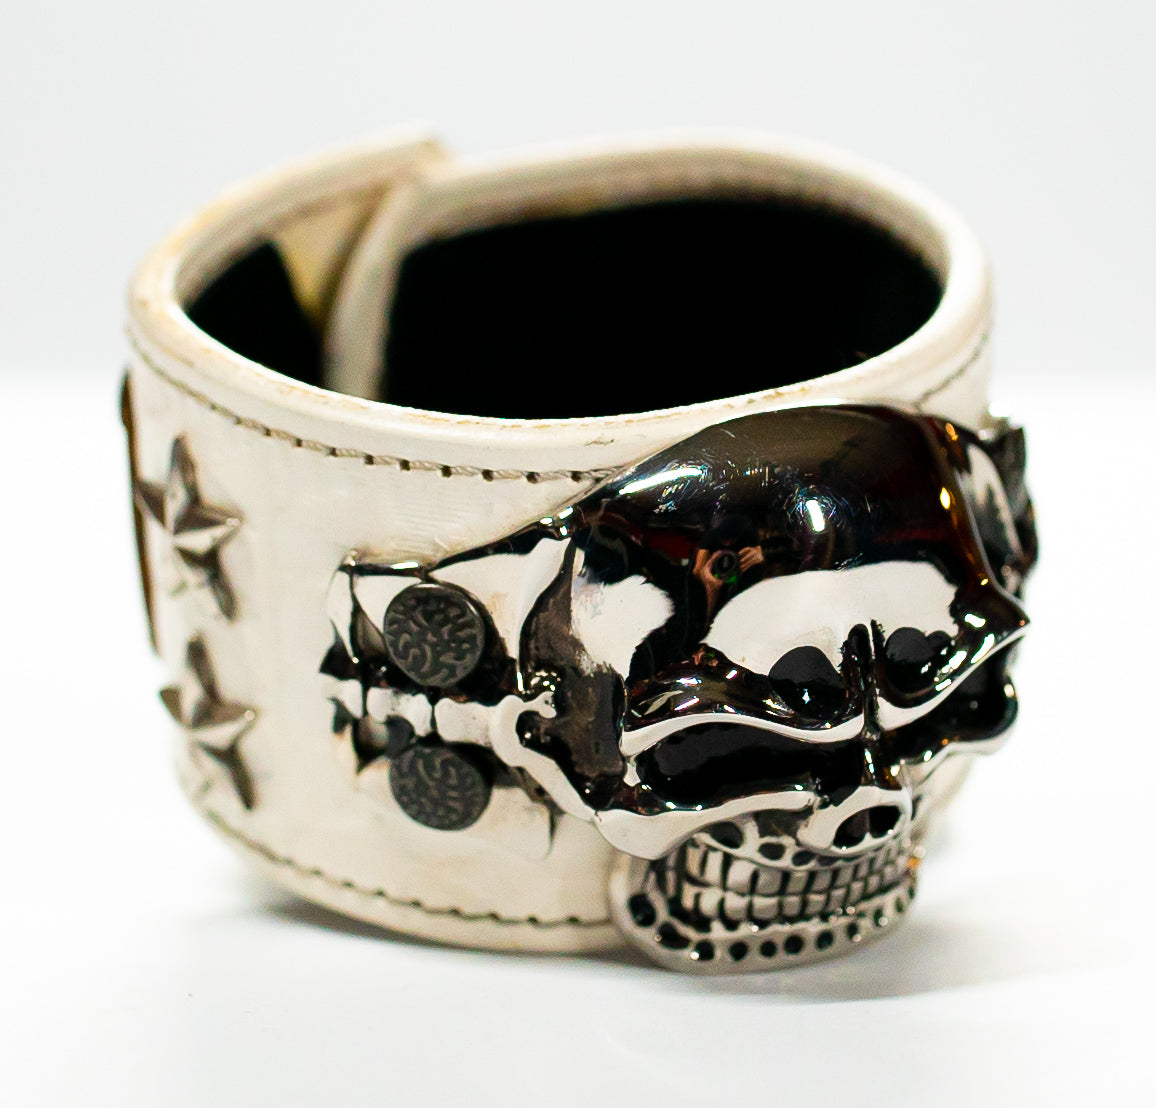 The Big Skull White Leather Cuff top view